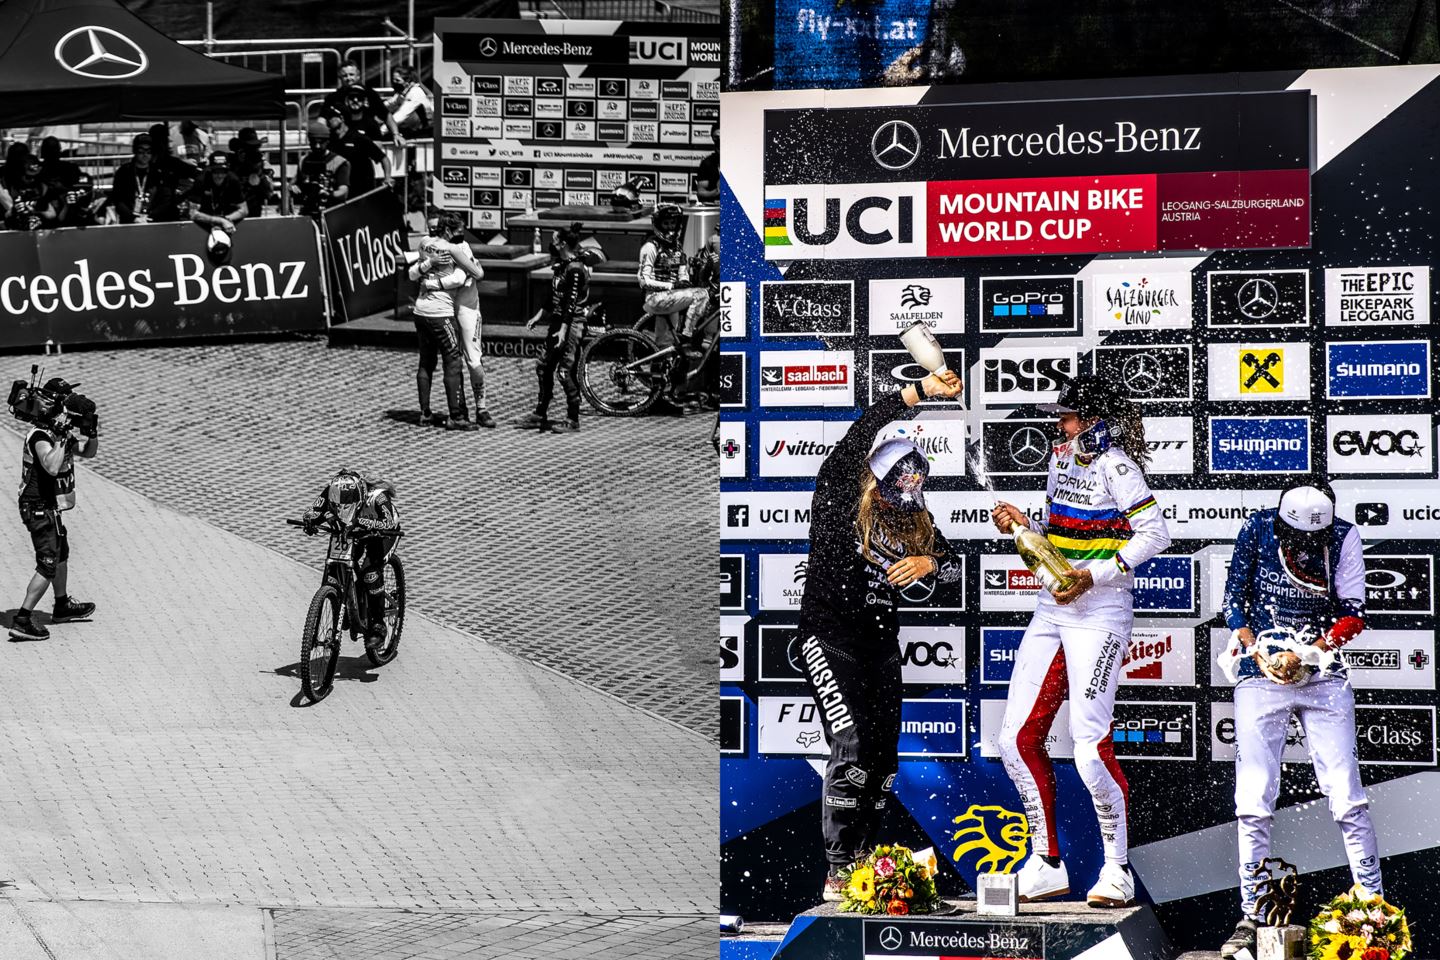 Vali Höll at finish link and on podium in Leogang, AUT